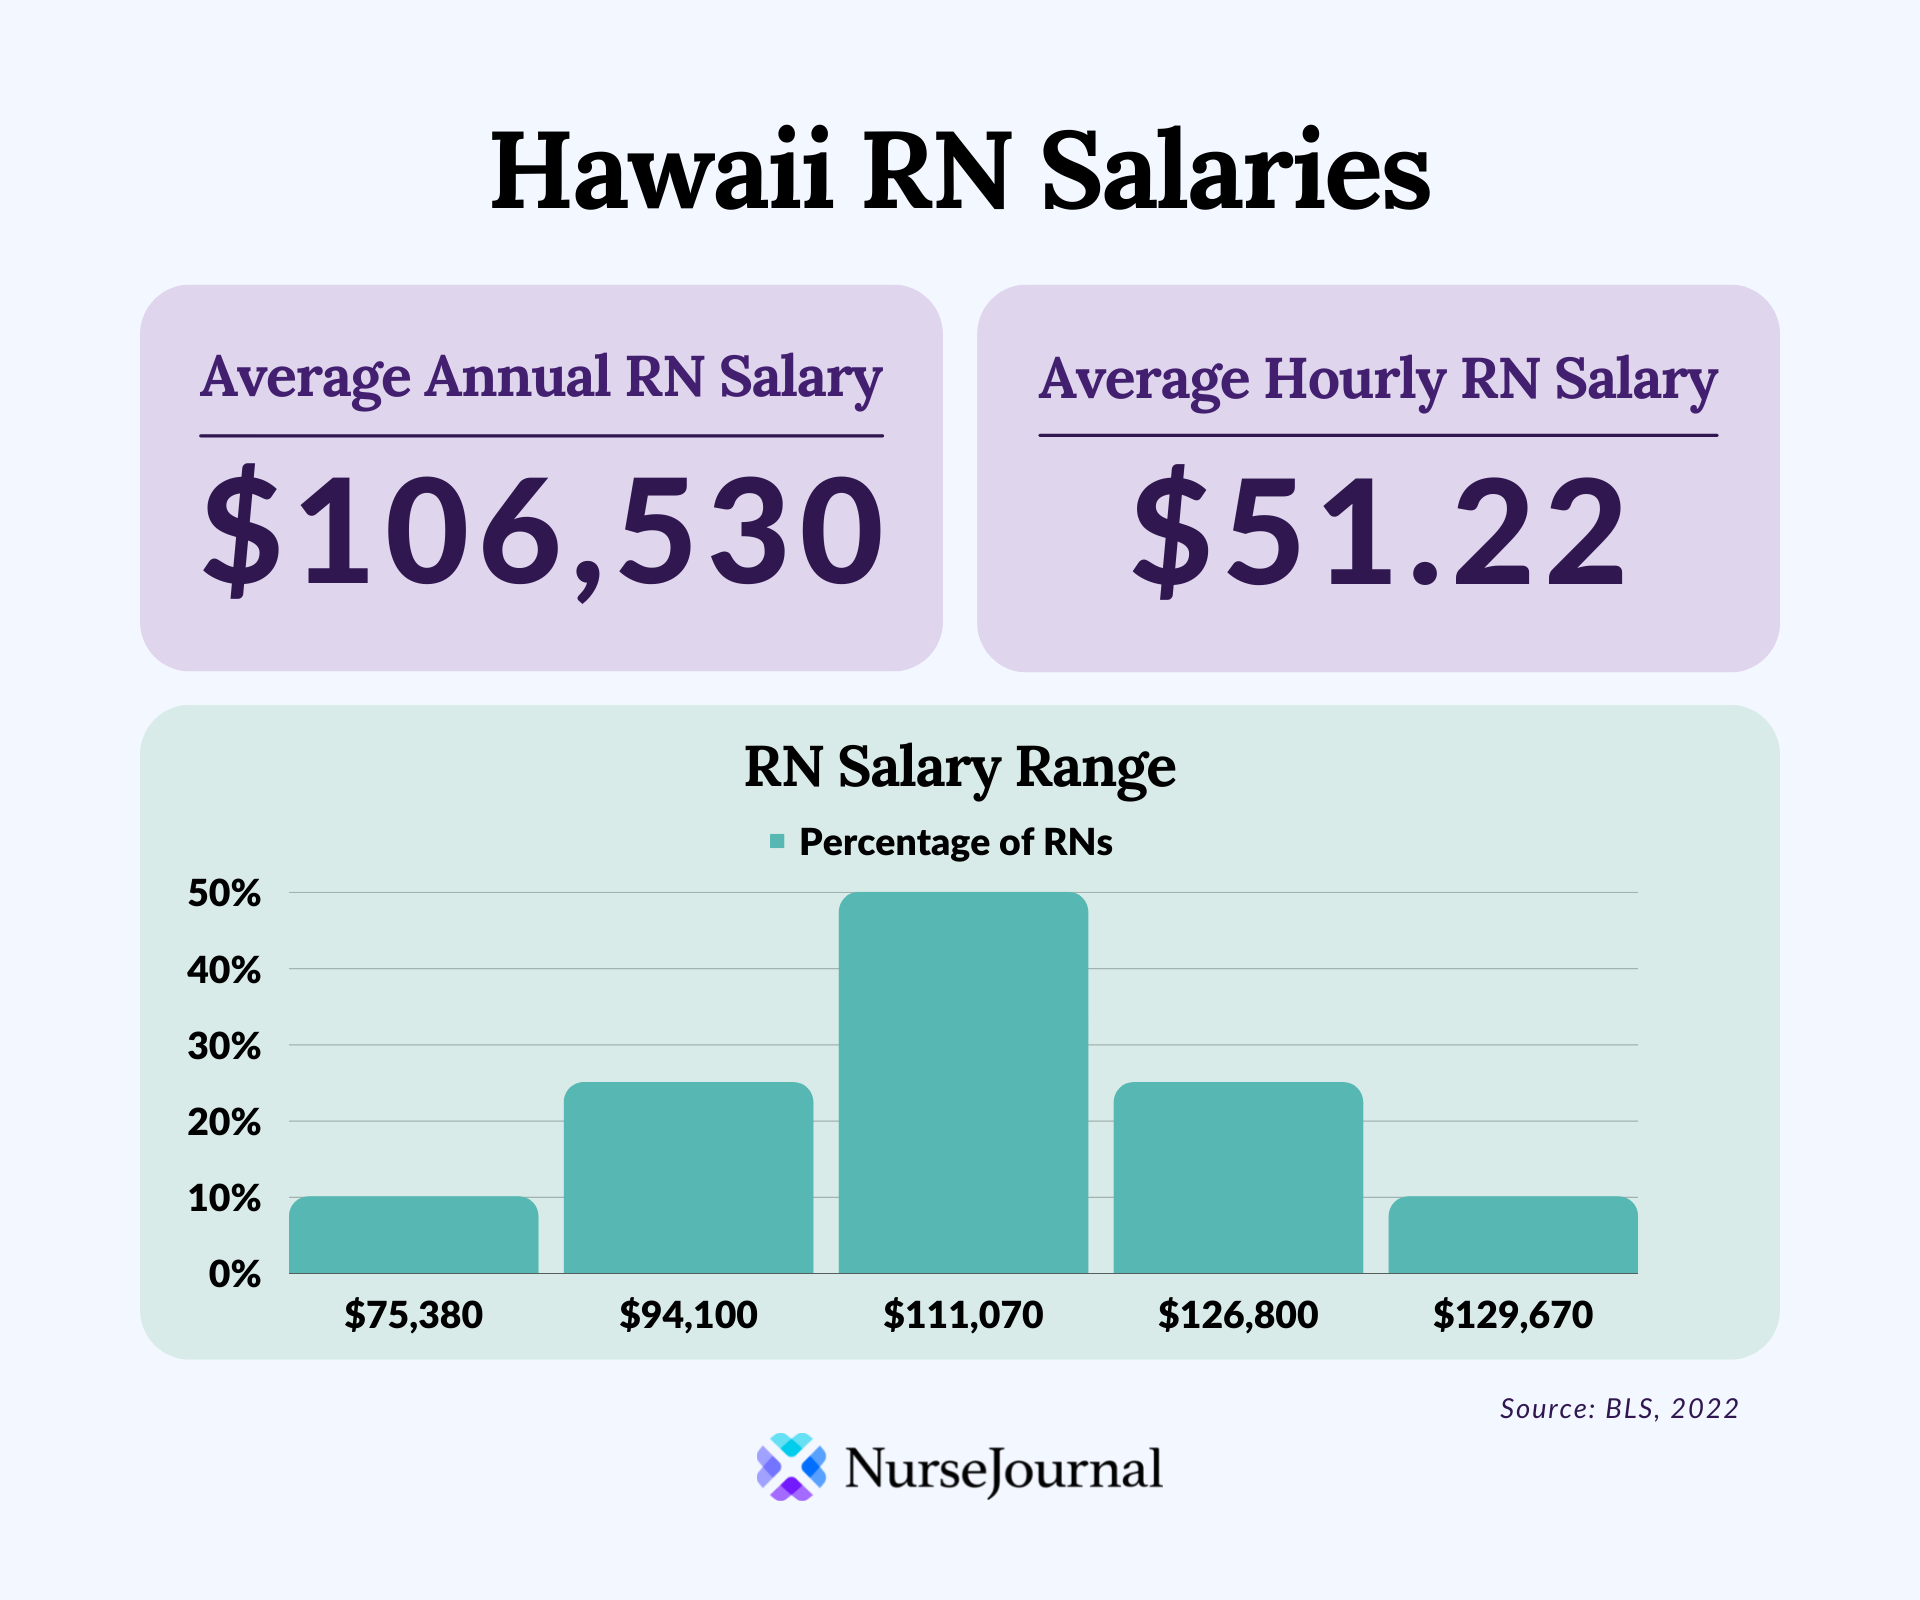 Infographic of registered nursing salary data in Hawaii. The average annual RN salary is $106,530. The average hourly RN salary is $51.22. Average RN salaries range from $75,380 among the bottom 10th percentile of earners to $129,670 among the top 90th percentile of earners.